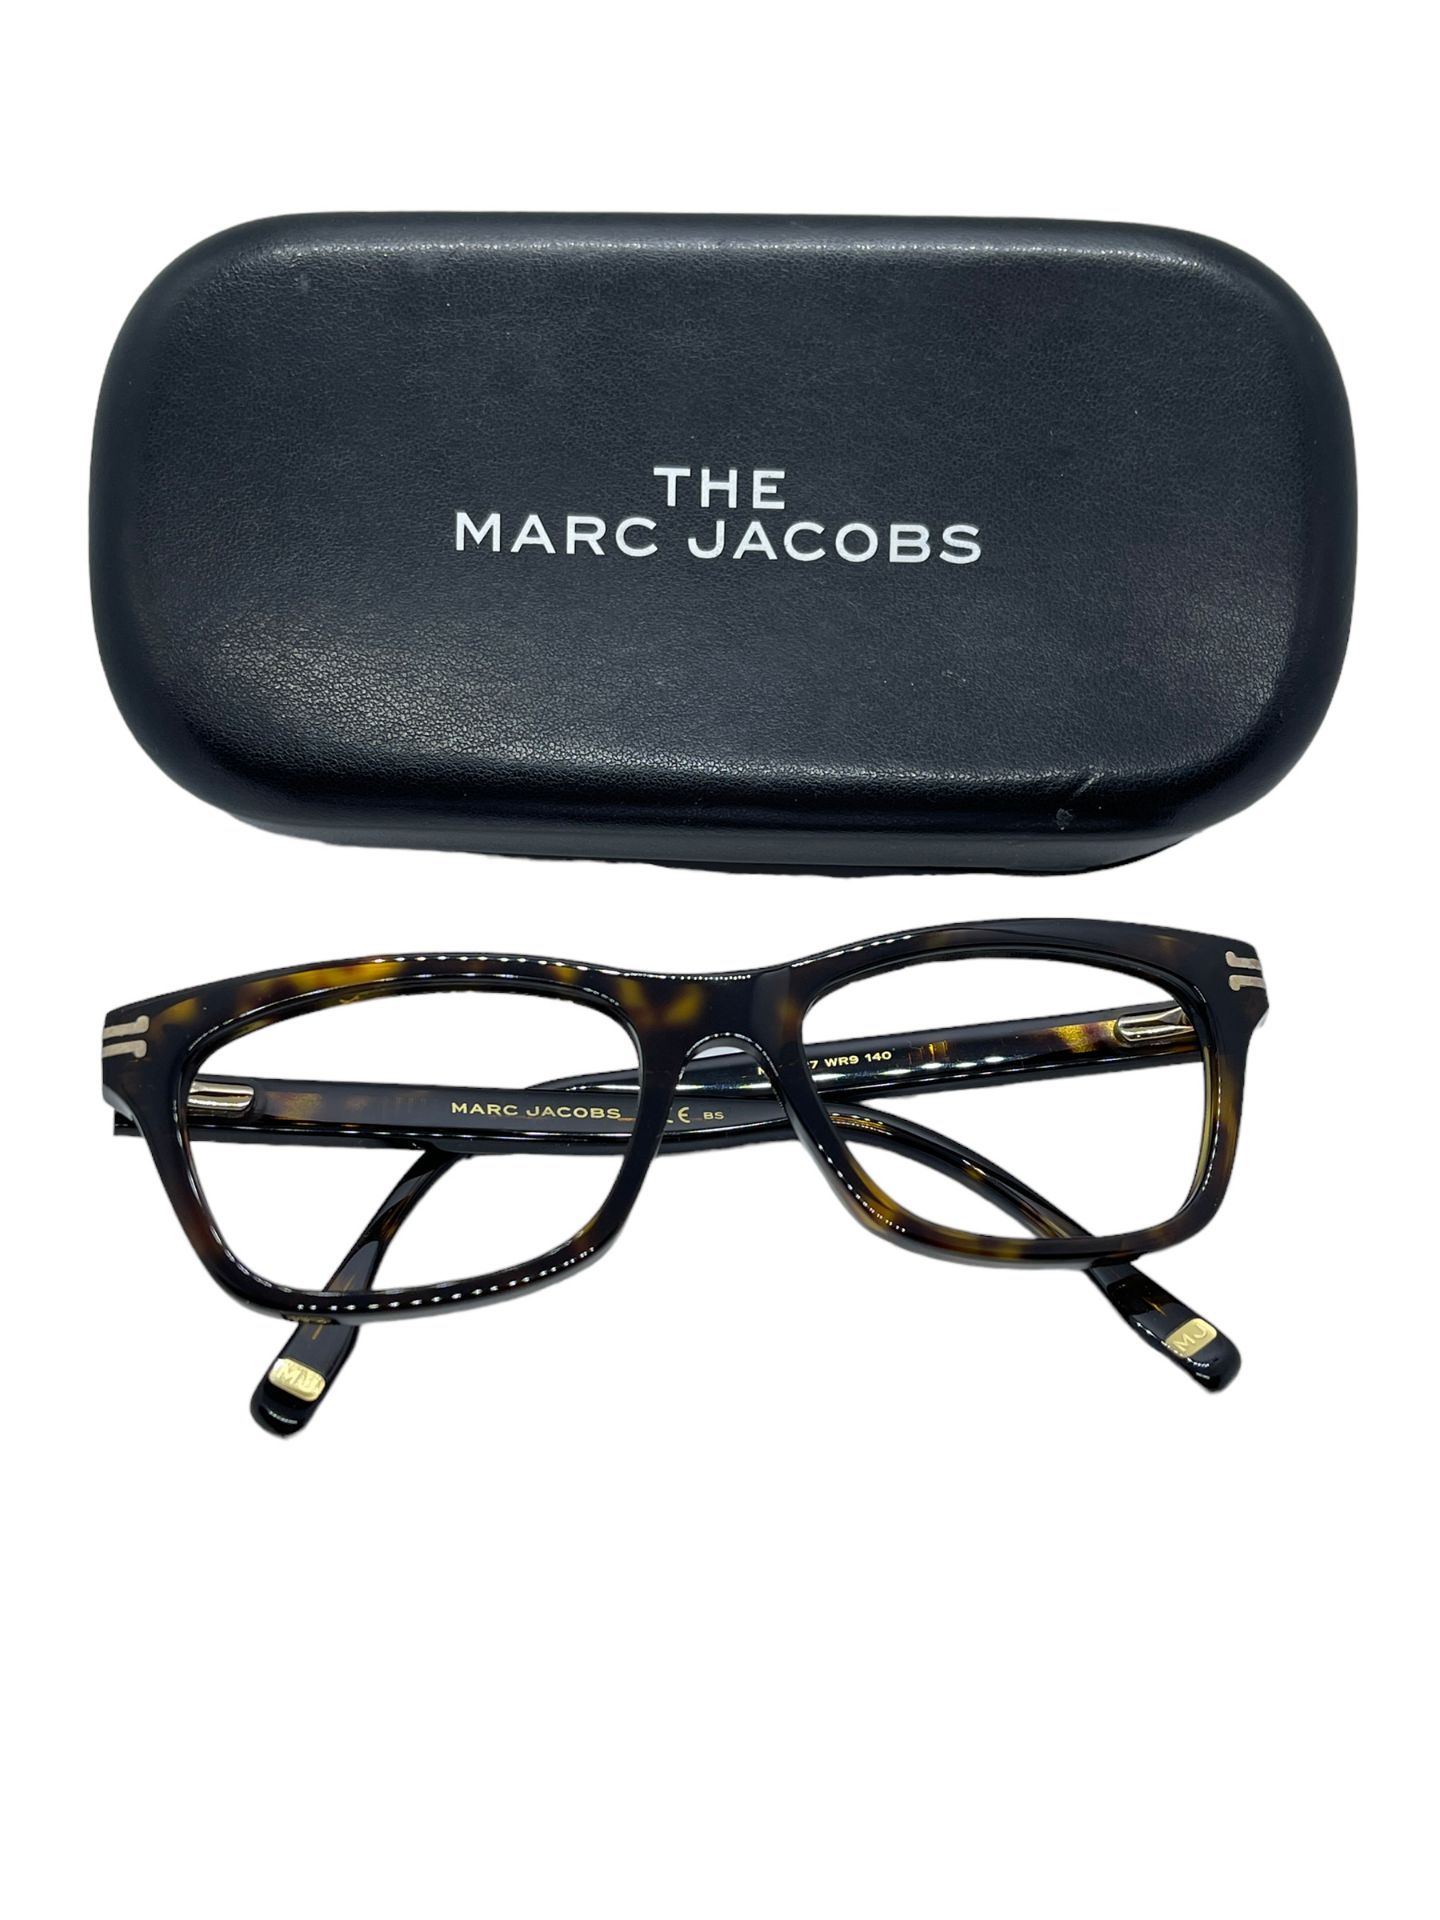 Marc Jacob's new spectacles mens.